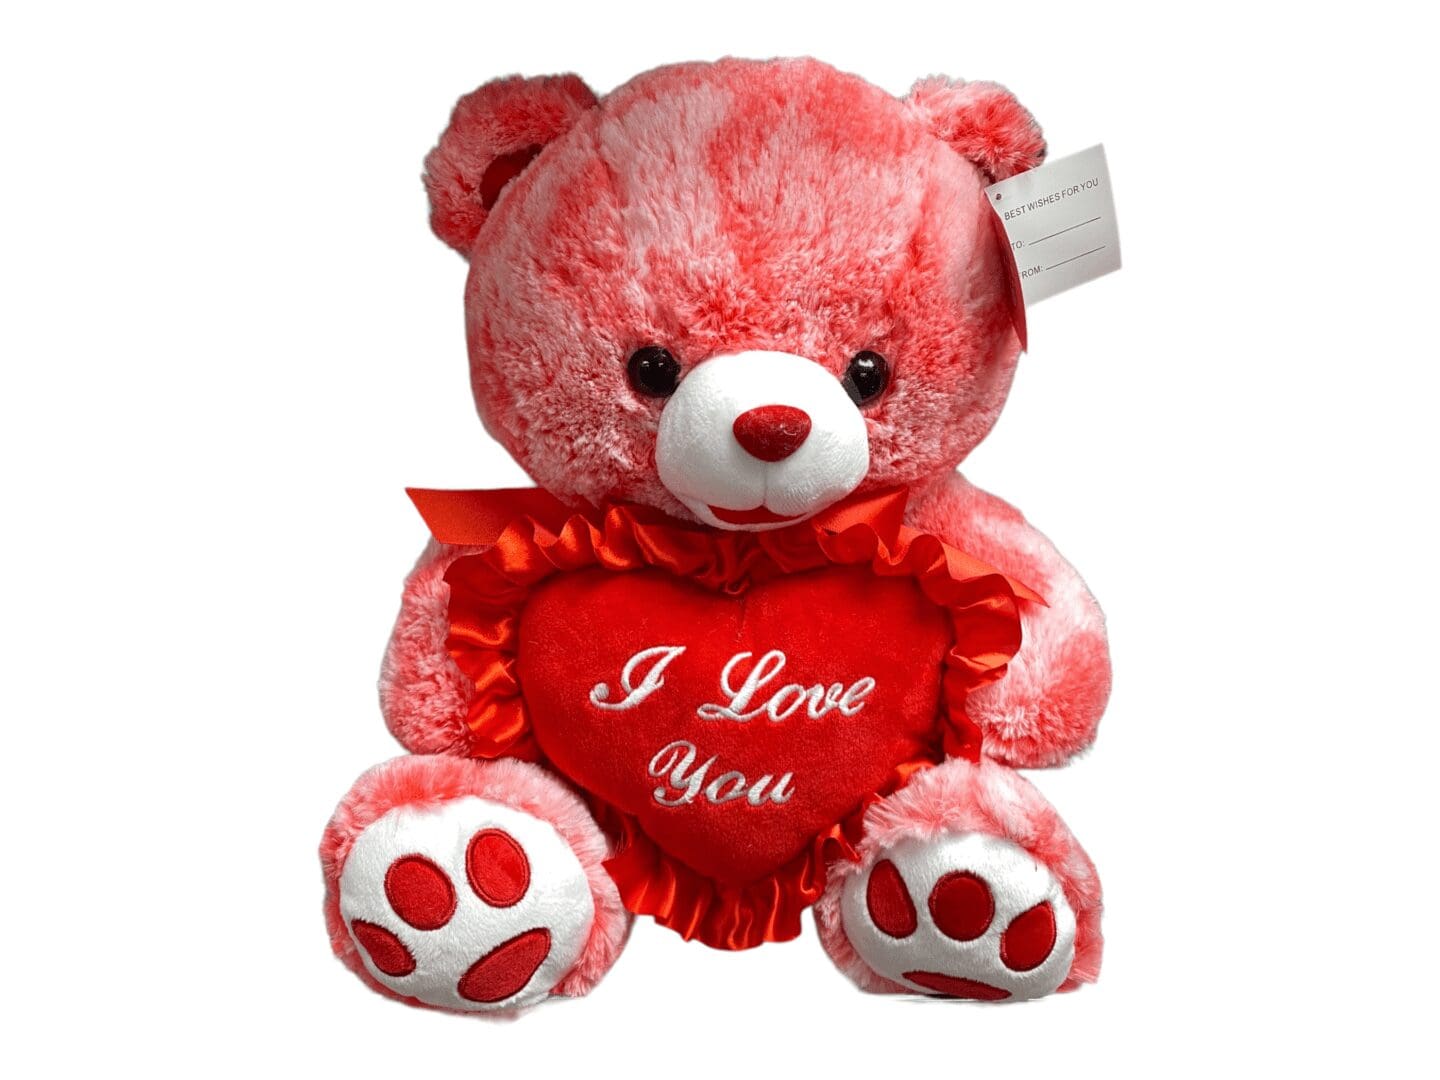 Gt8008 red heart, I love you bear14